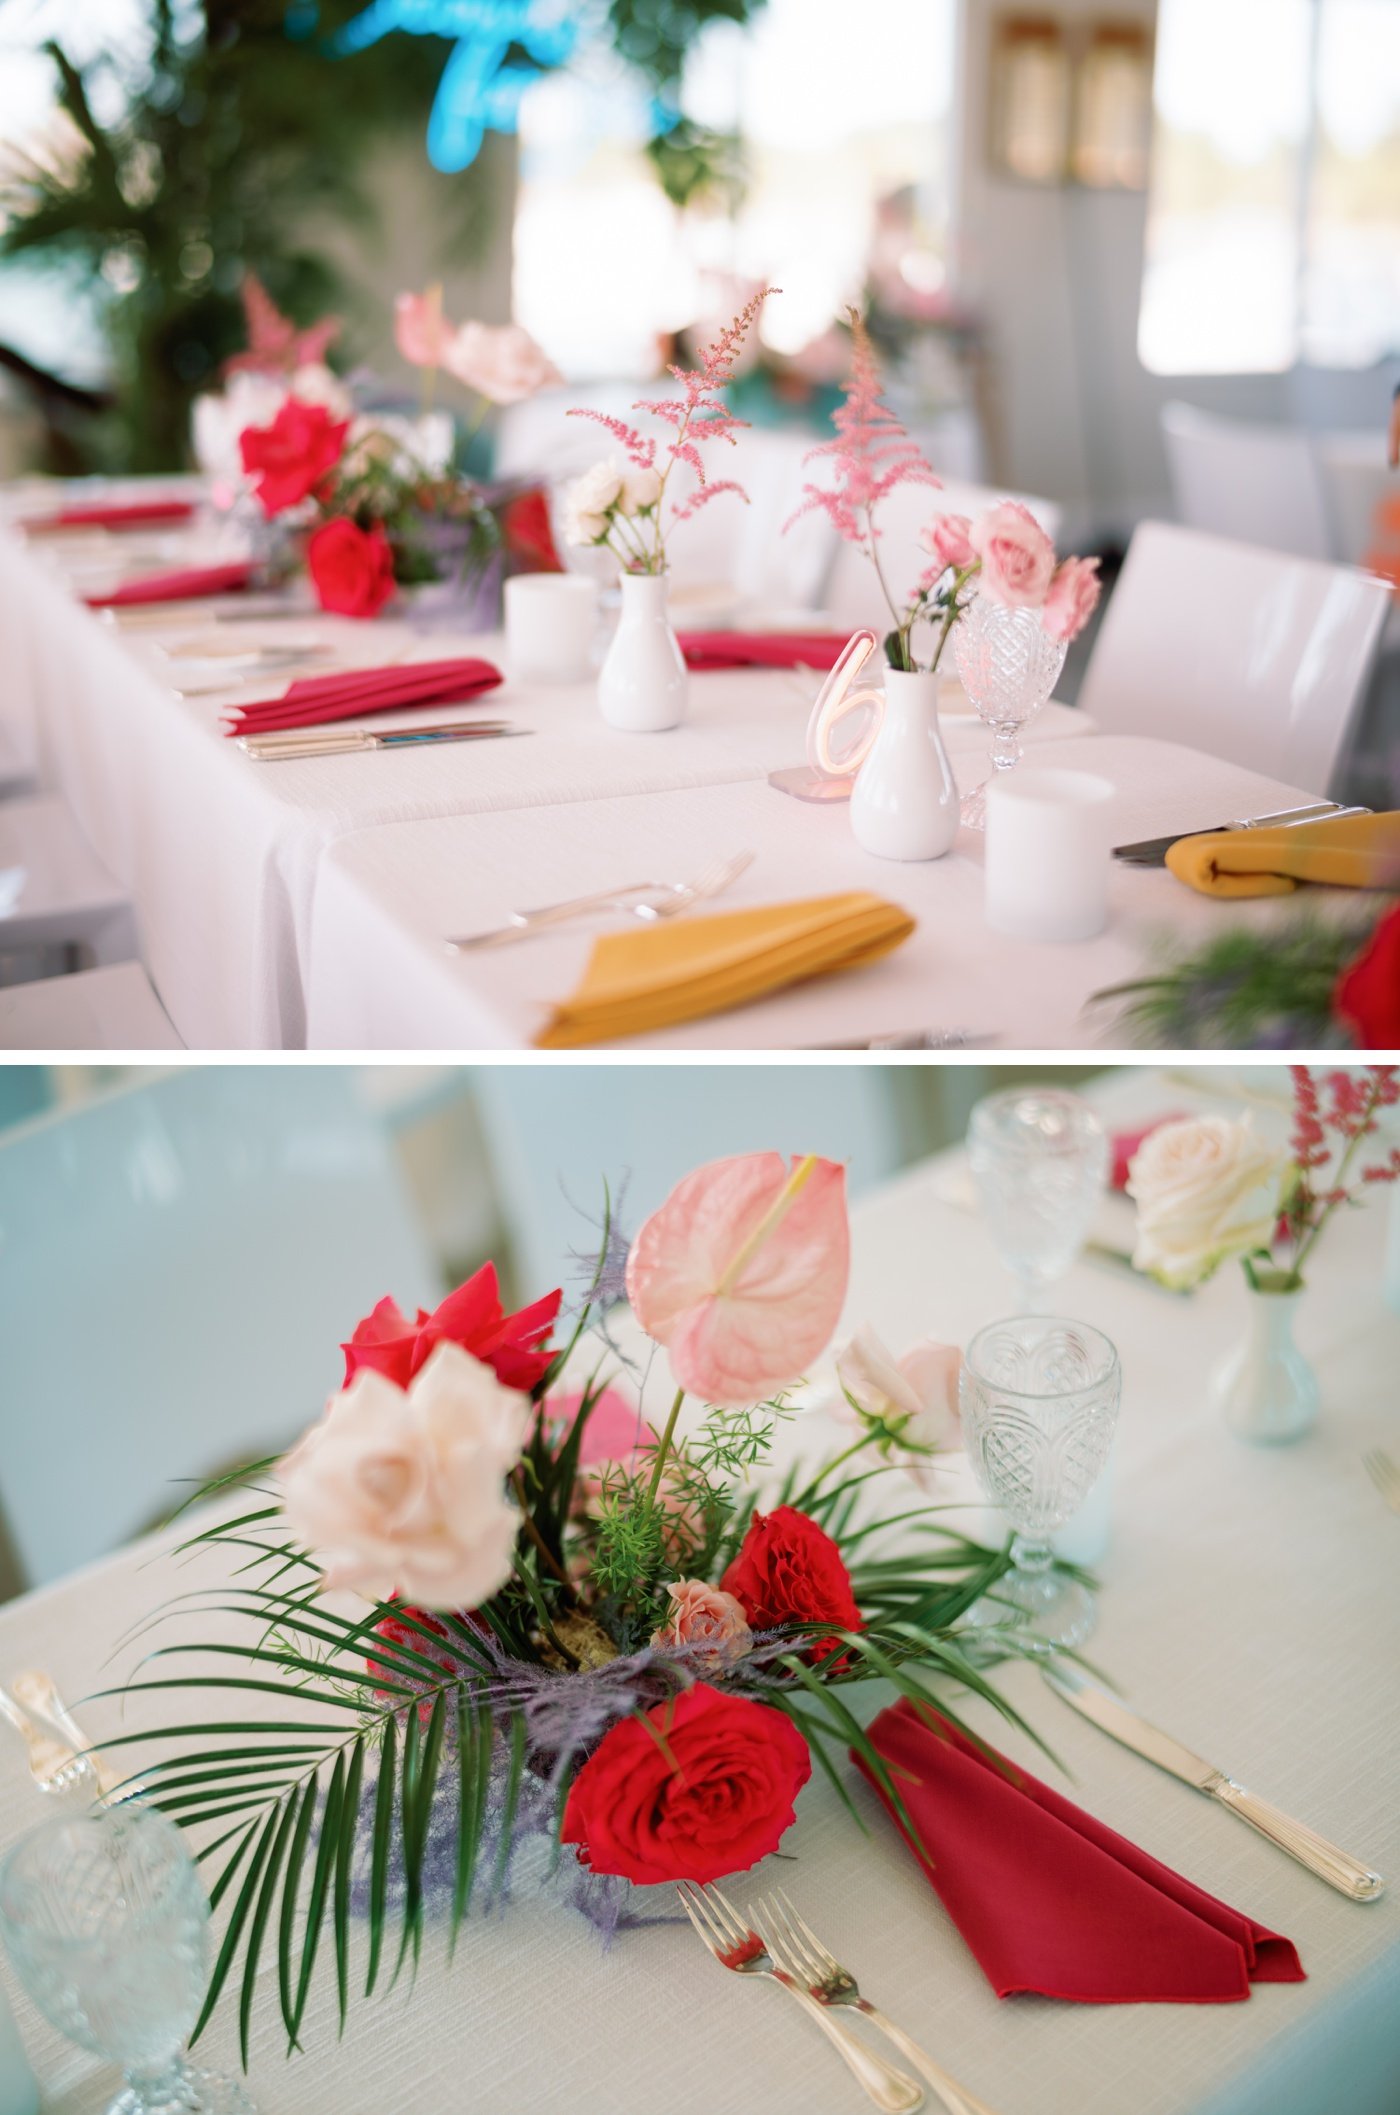 Hot pink and mustard linens and bud vases with pink astilbe at a colorful wedding reception